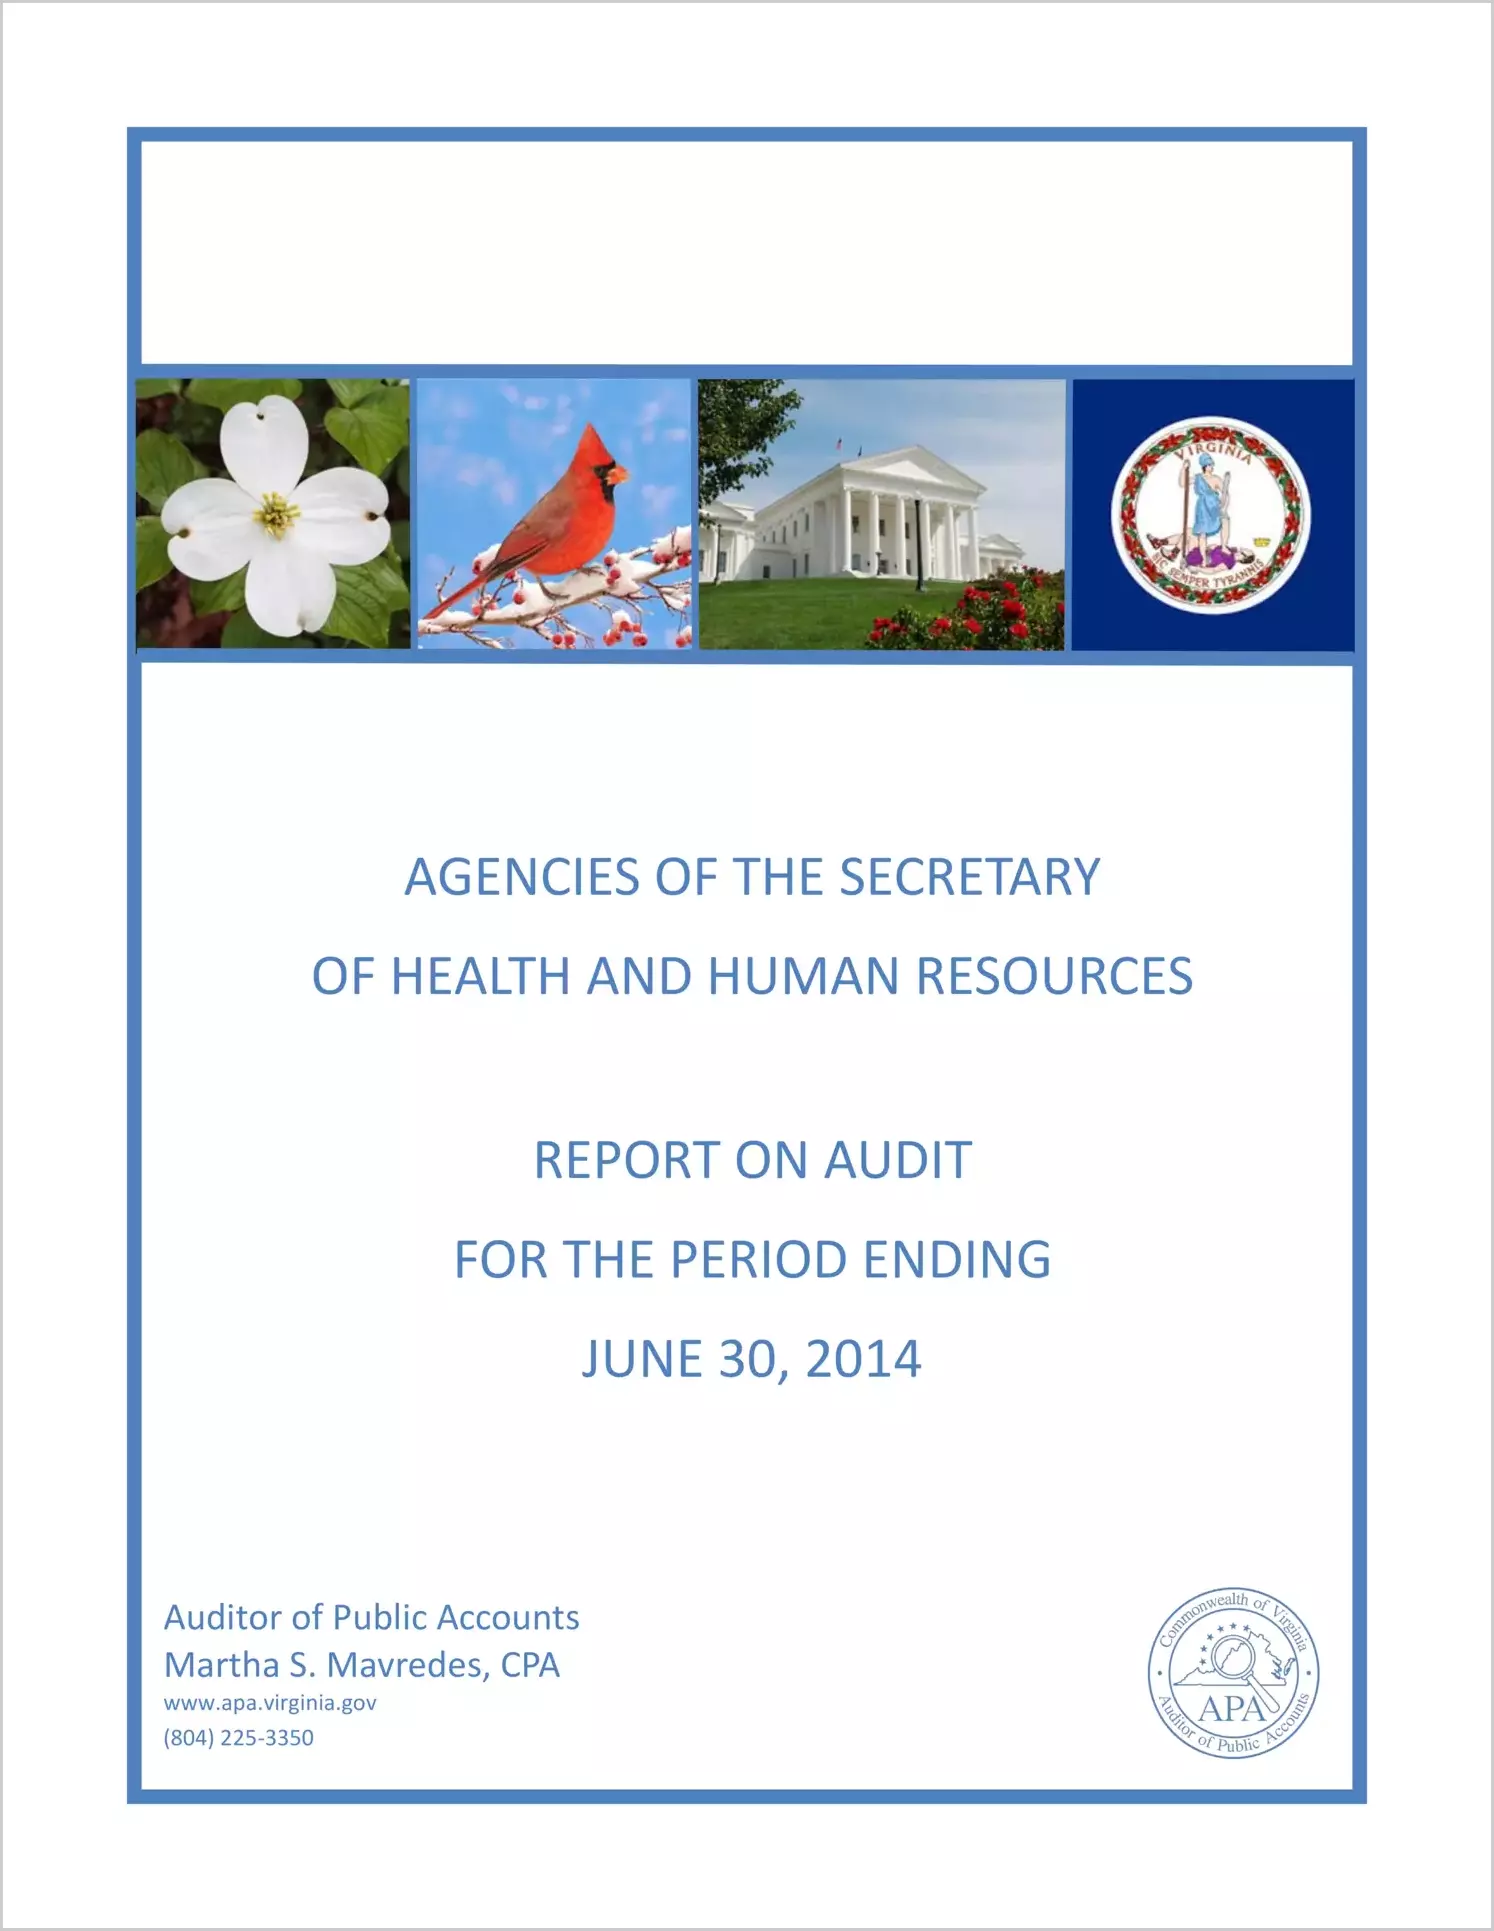 Agencies of the Secretary of Health and Human Resources - June 30, 2014